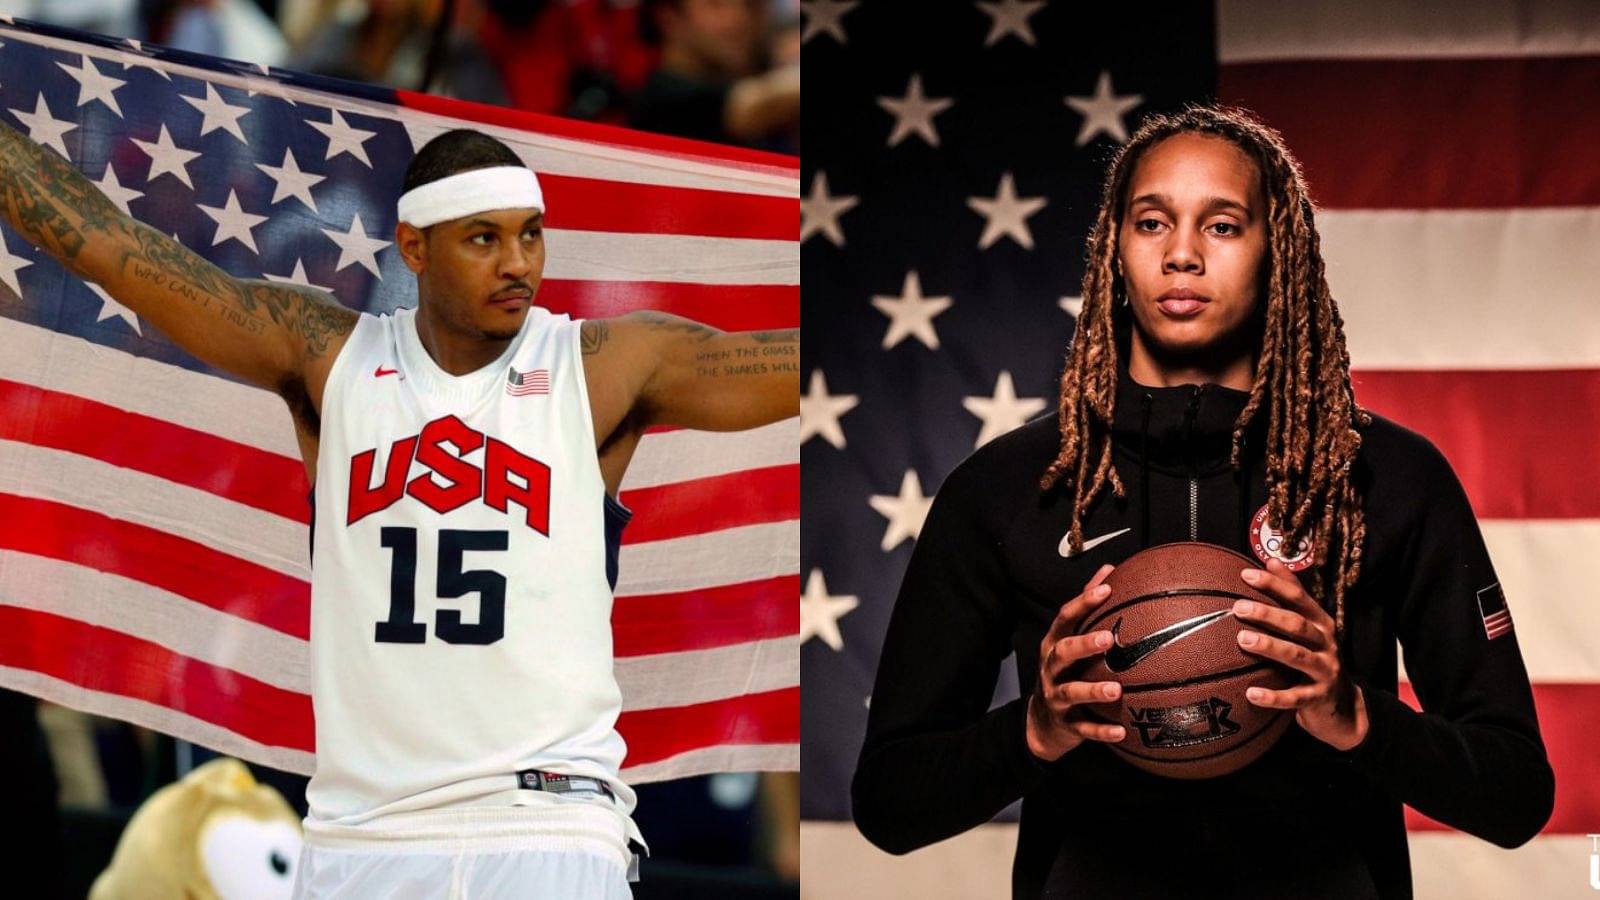 “105th day that our friend, sister, teammate, Brittney Griner has been wrongfully detained in Russia”: Carmelo Anthony asks people to sign a petition for the WNBA star’s release